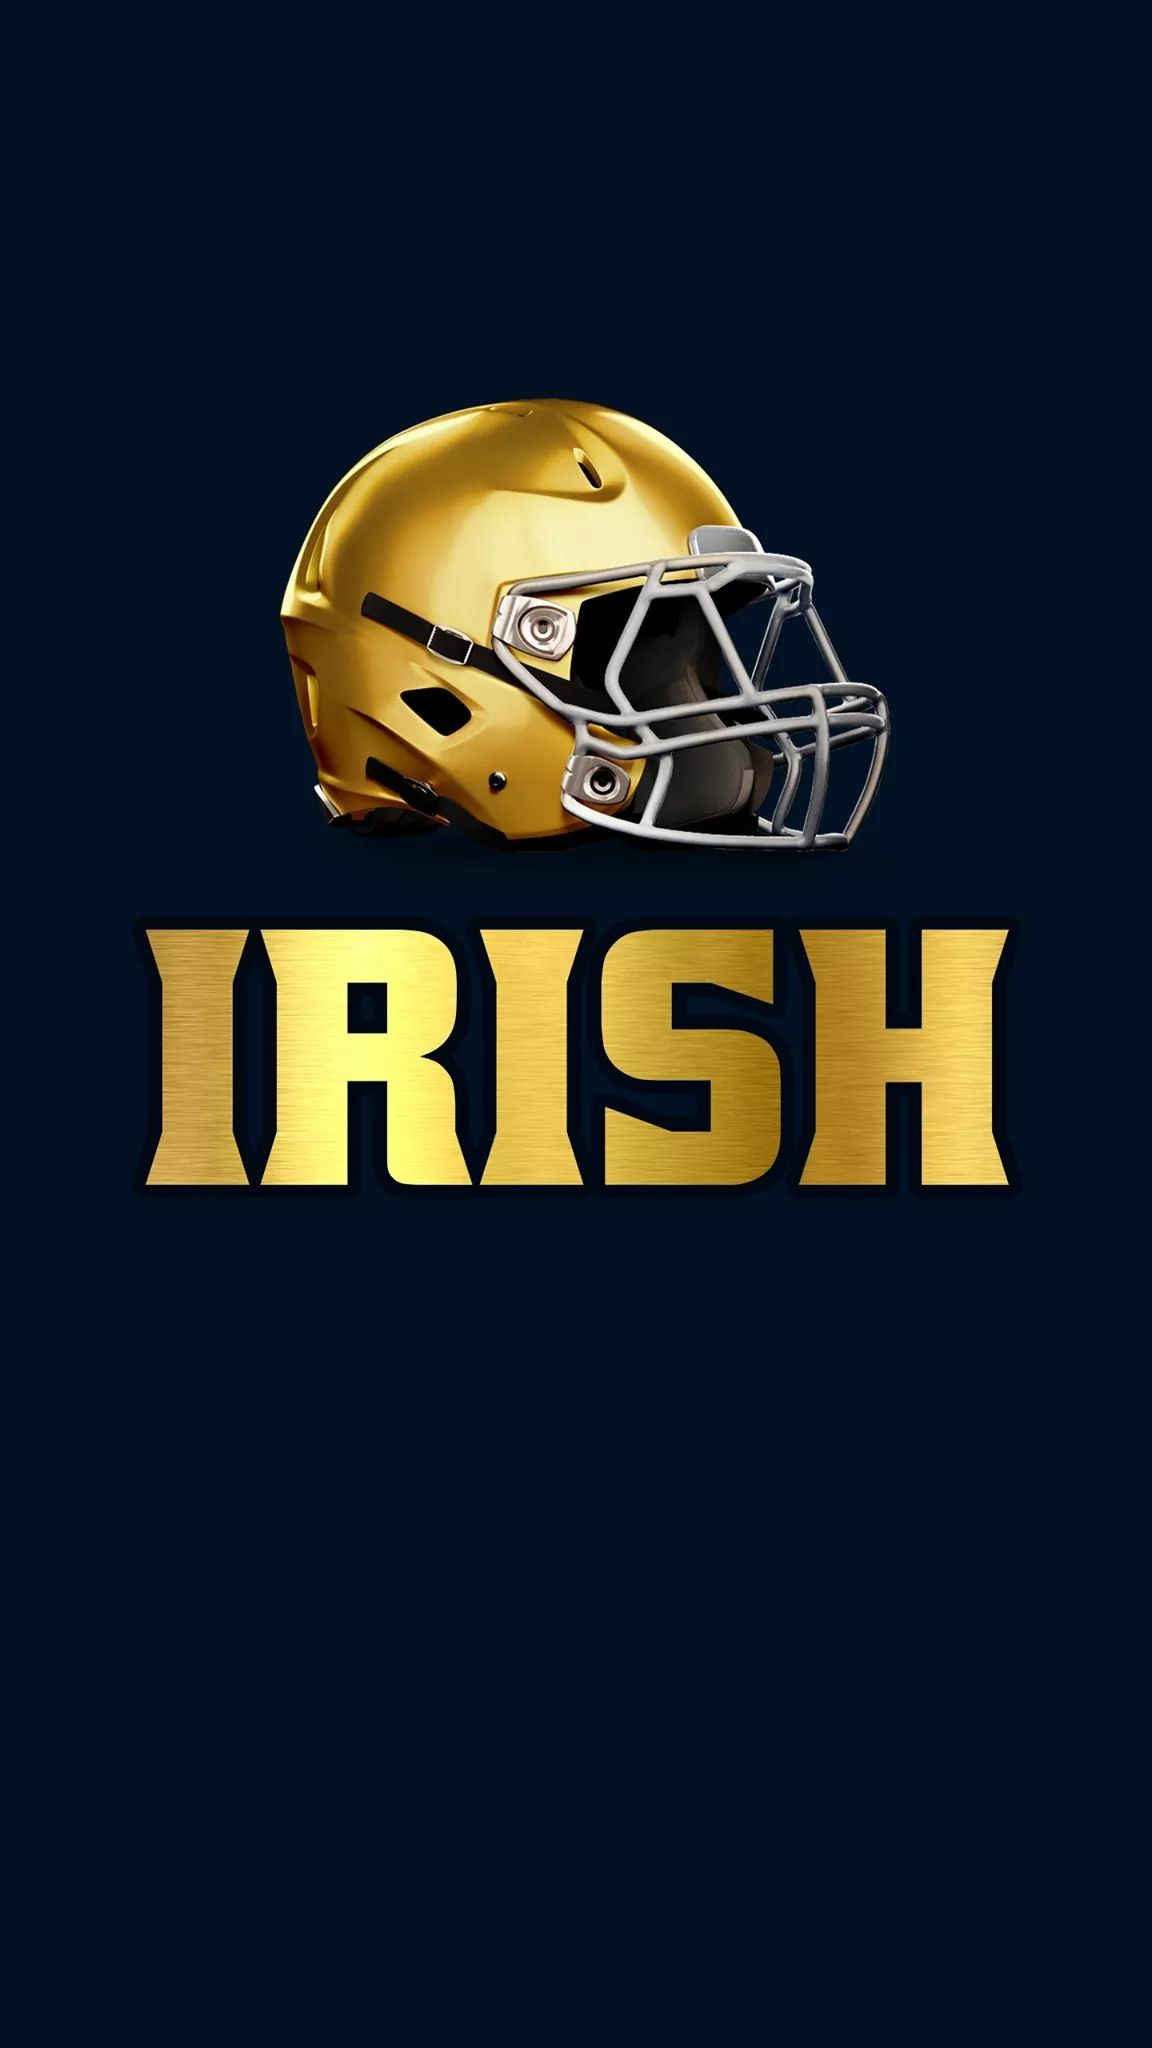 1152x2048 Notre Dame Football Wallpapers Top Free Notre Dame Football Backgrounds